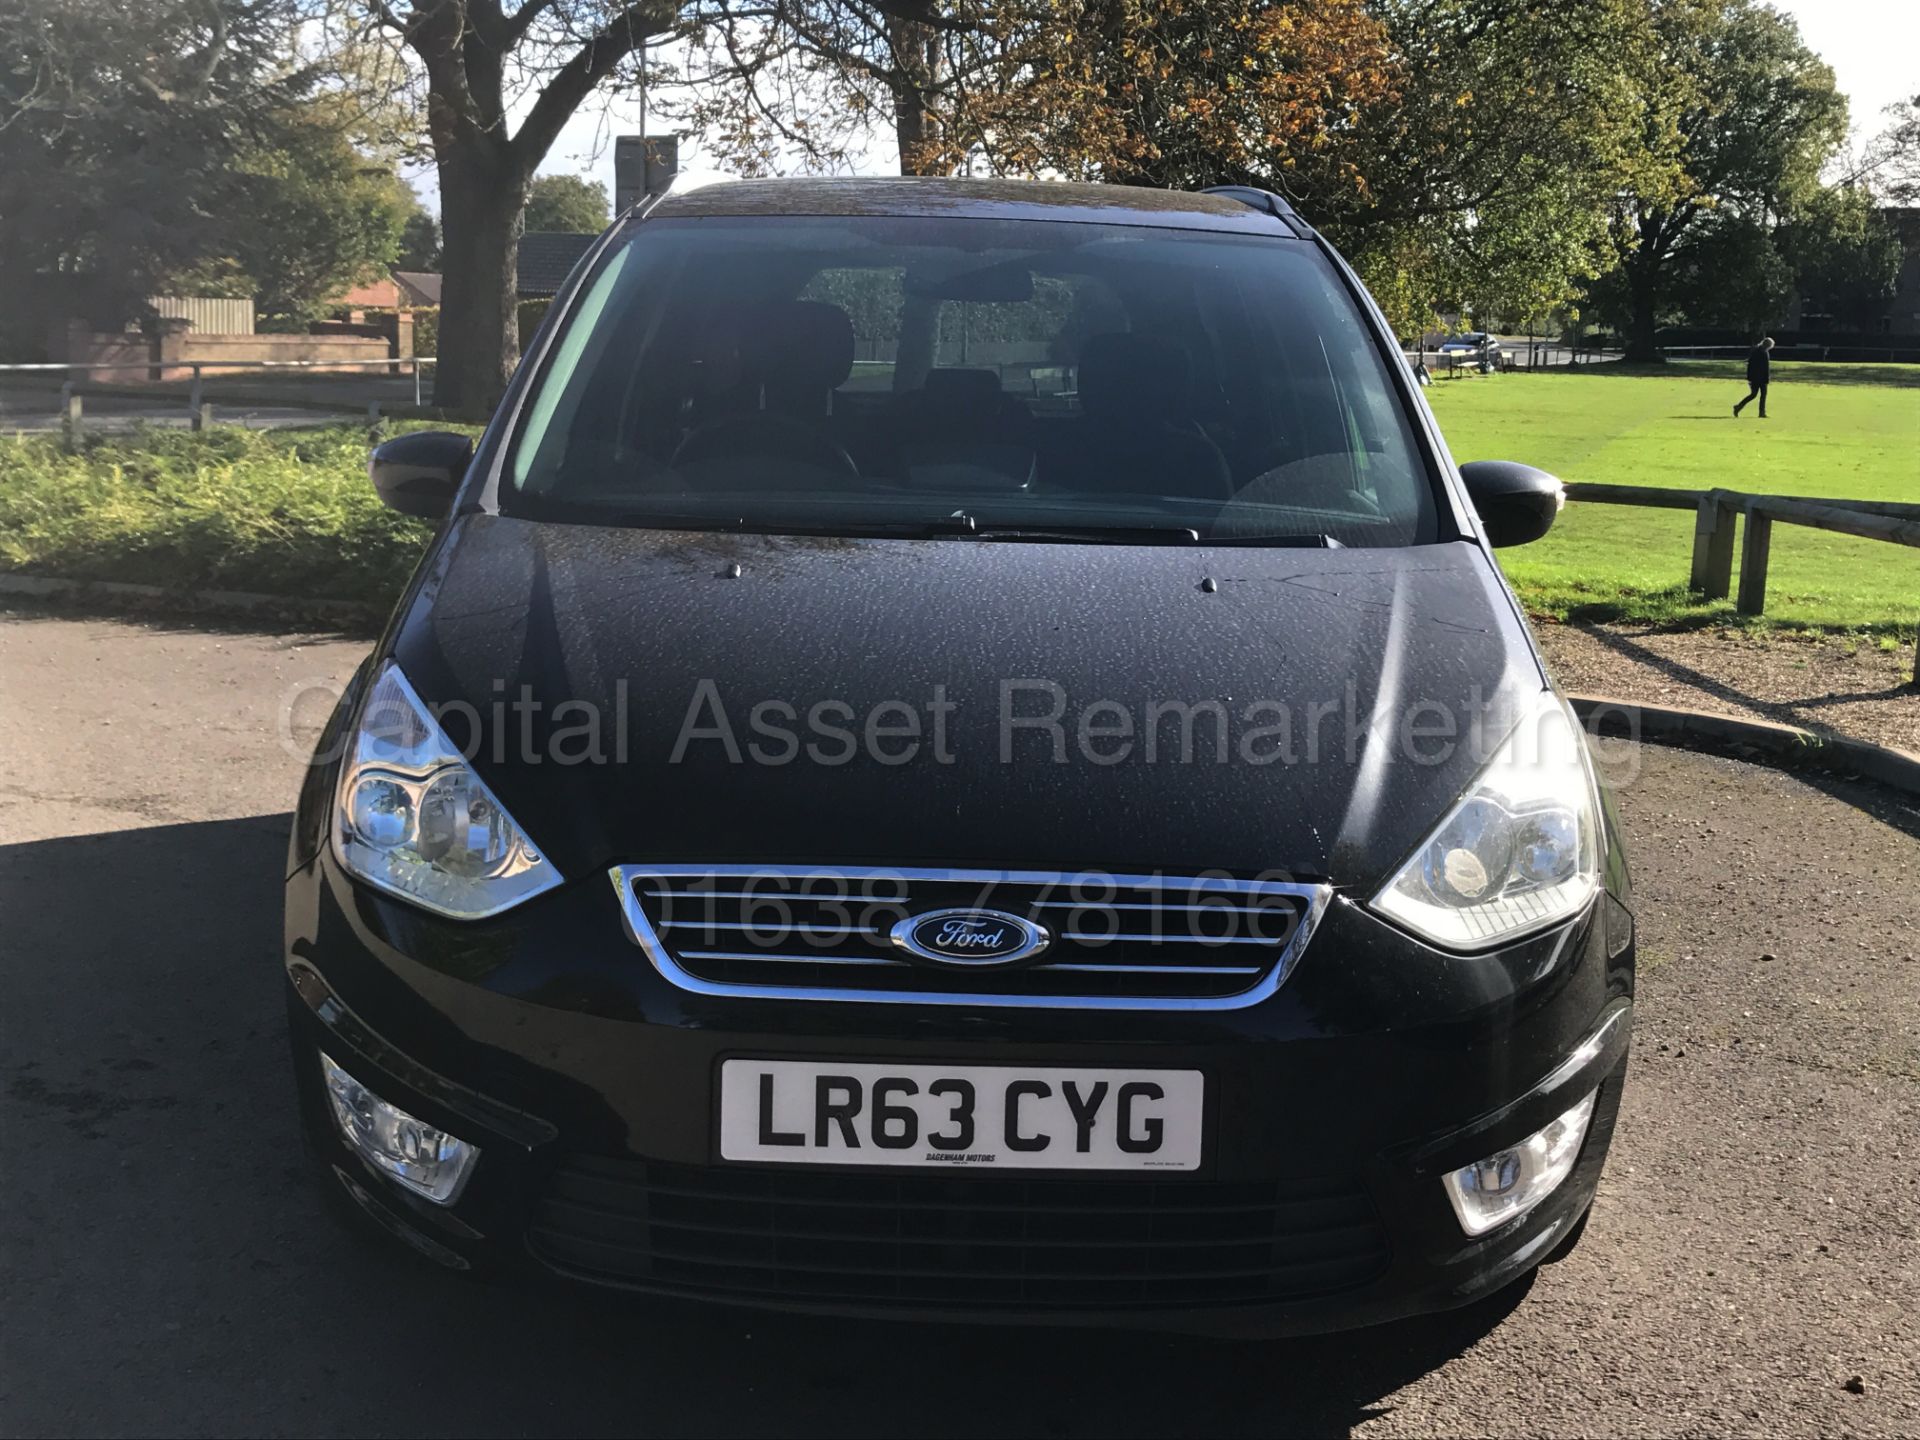 (ON SALE) FORD GALAXY 'ZETEC' 7 SEATER MPV (2014 MODEL) '2.0 TDCI -140 BHP' (1 OWNER) *FULL HISTORY* - Image 10 of 28